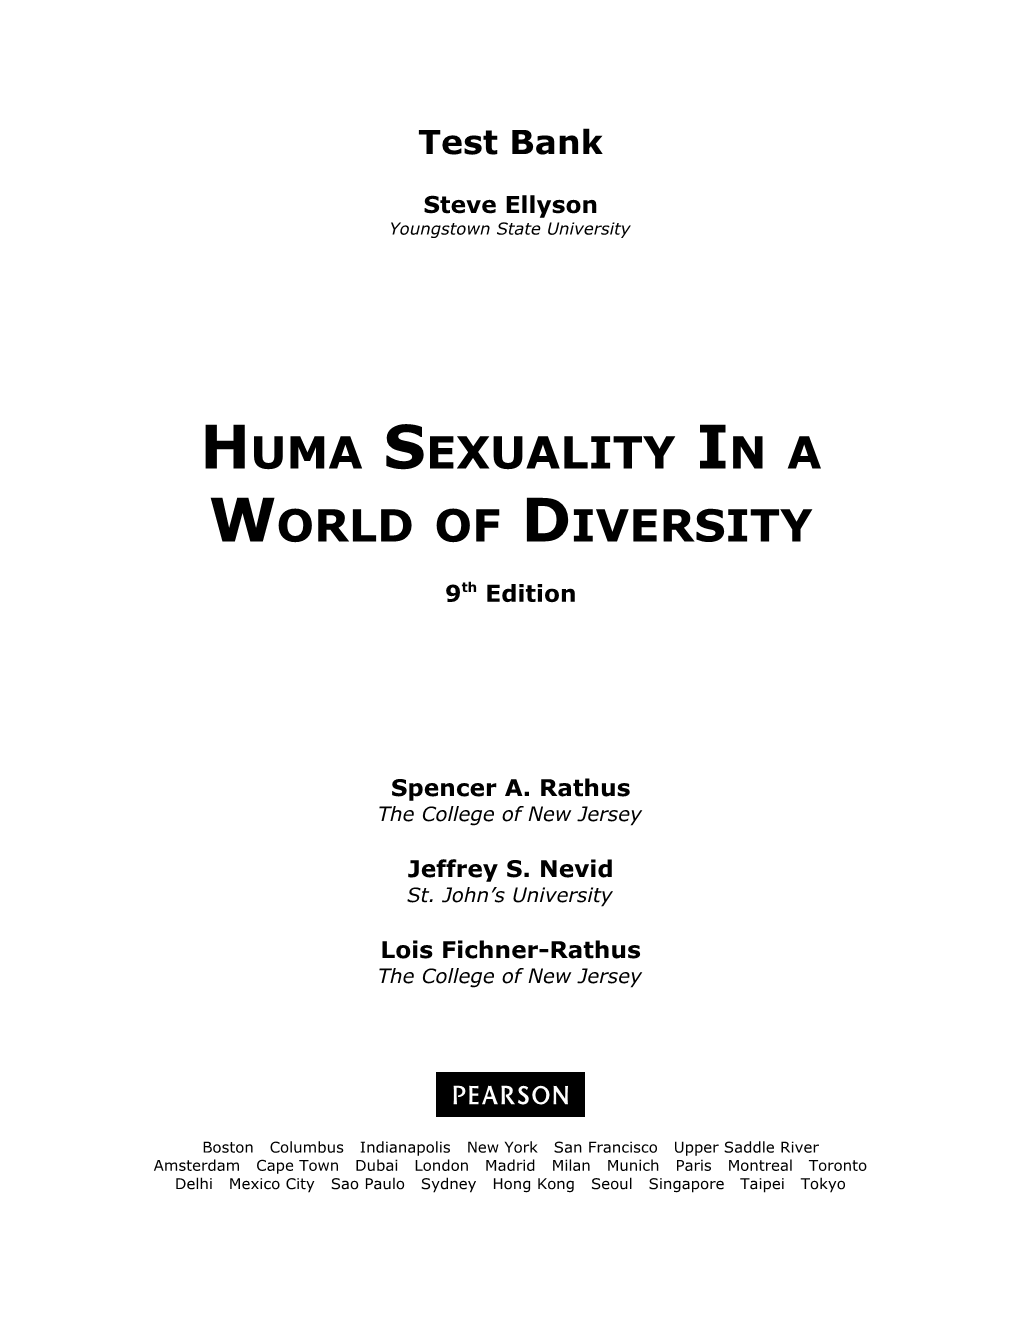 Huma Sexuality in a World of Diversity